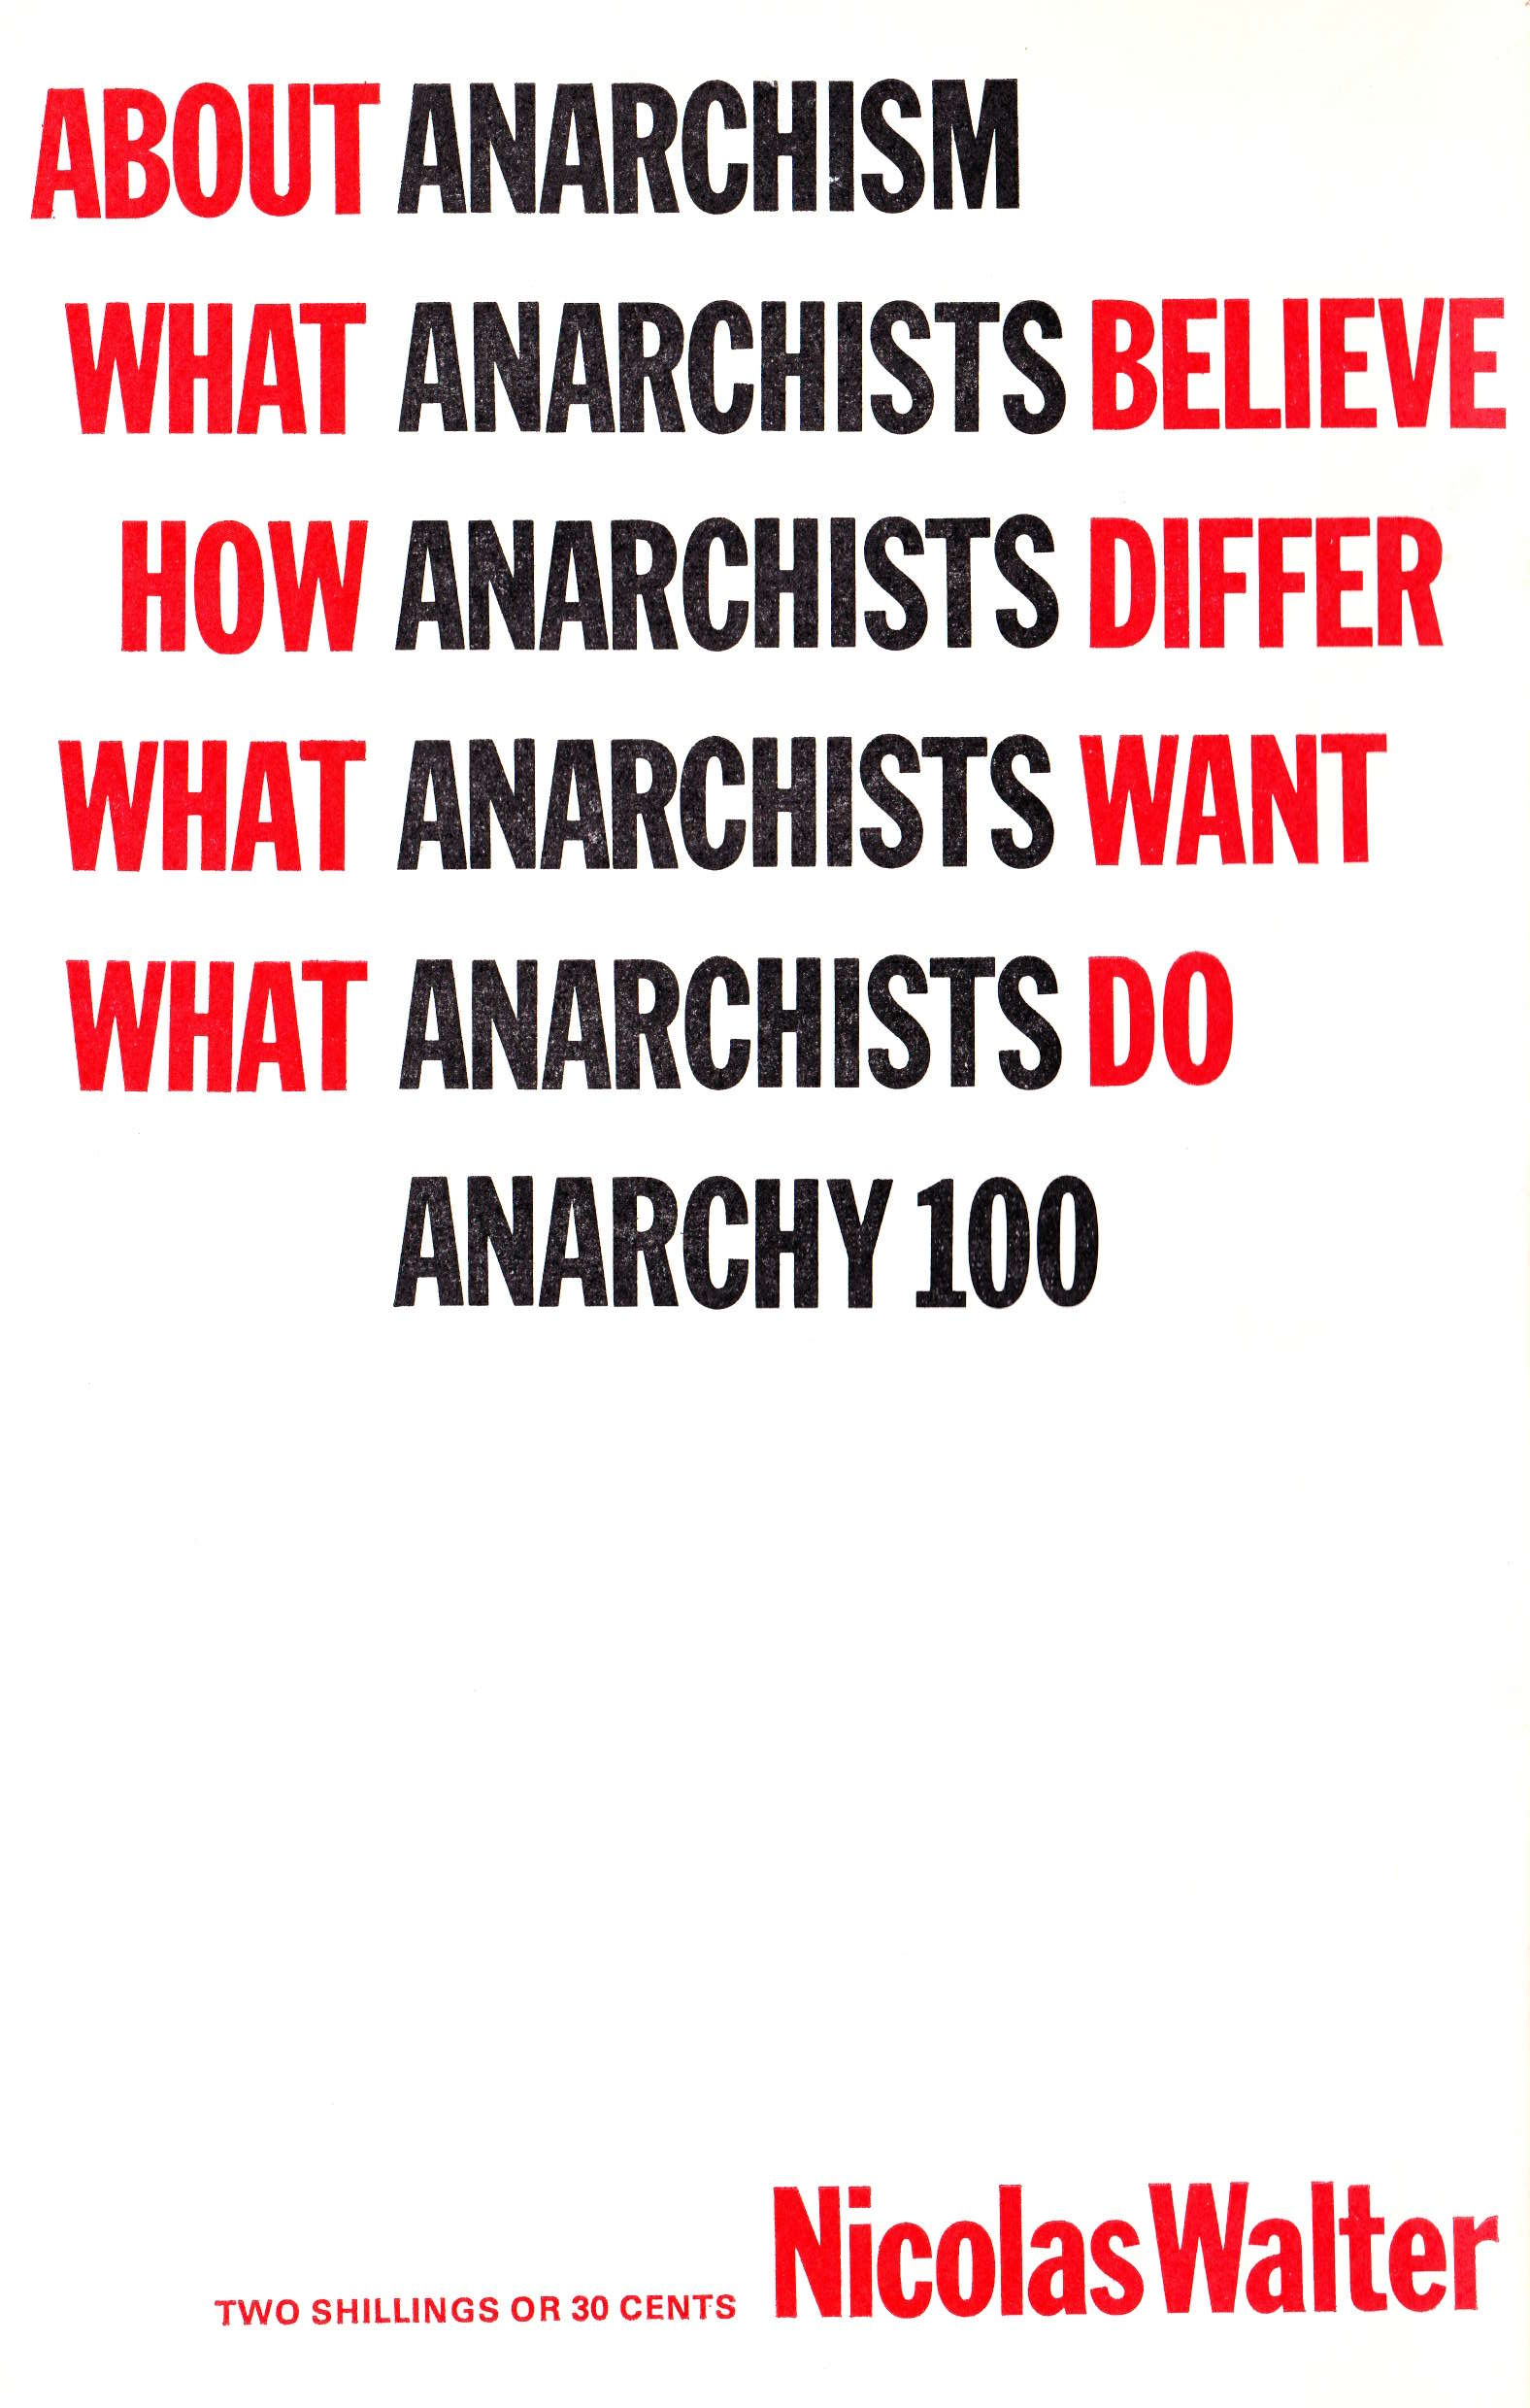 n-w-nicolas-walter-about-anarchism-1.png